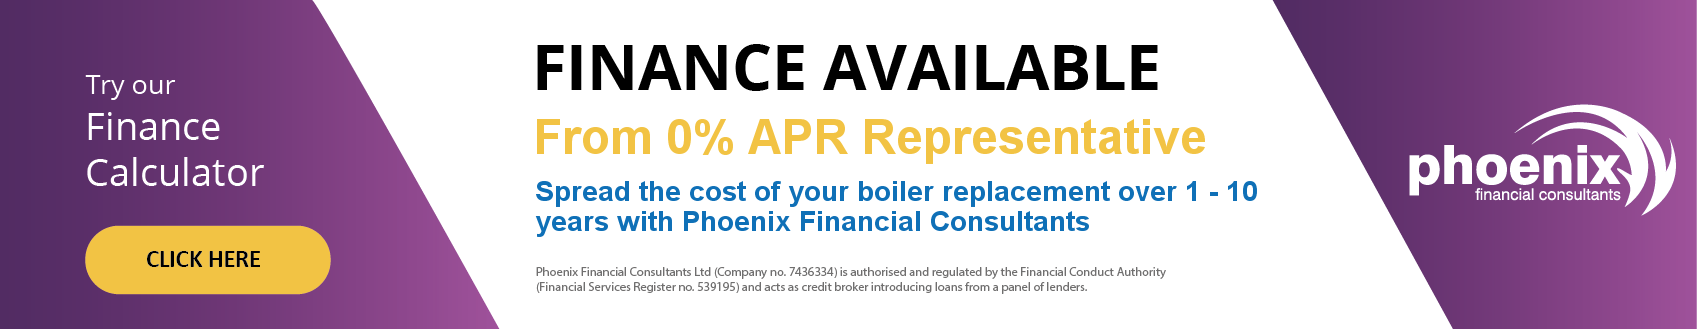 Boiler replacement finance available